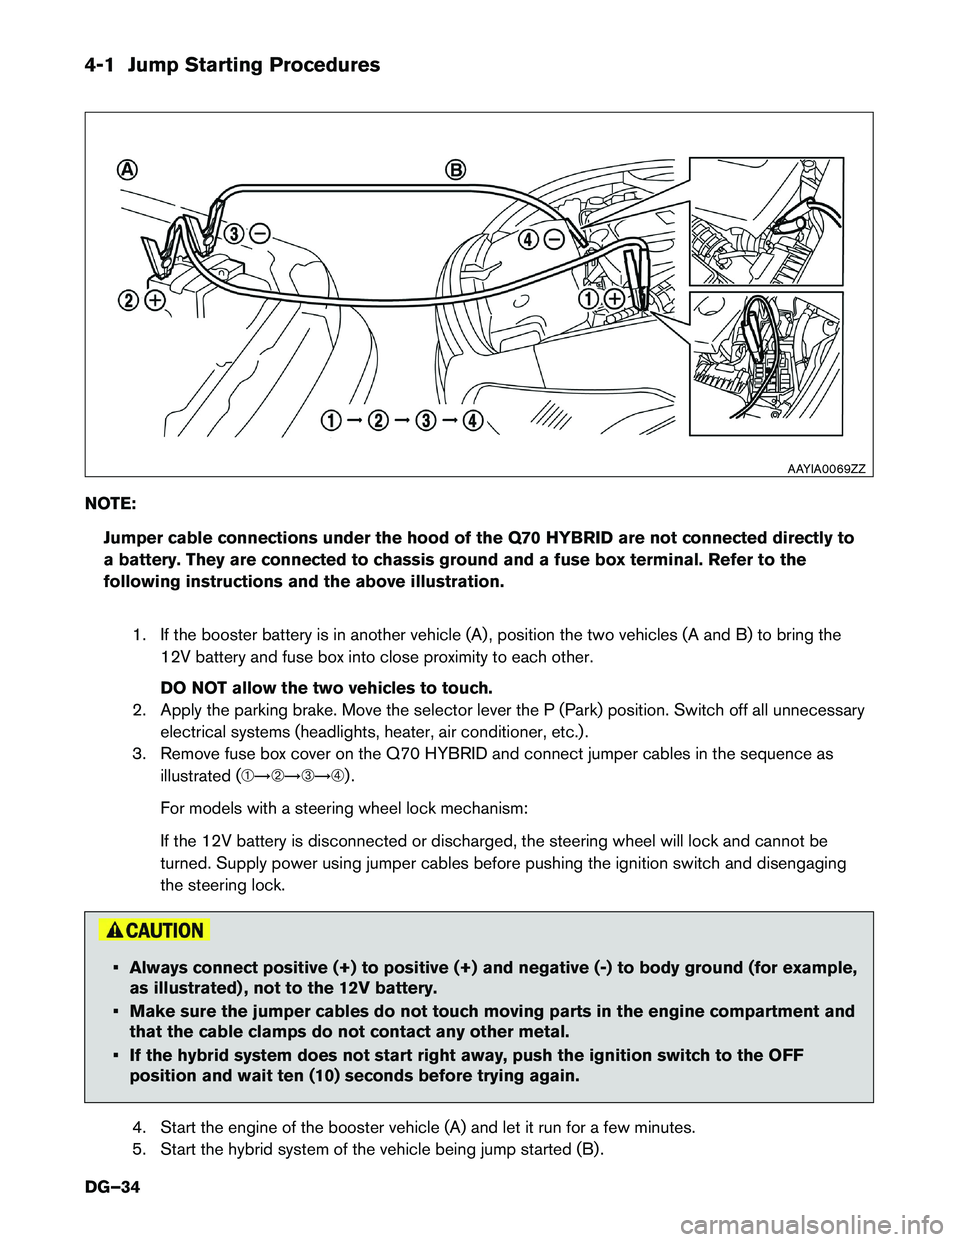 INFINITI Q70 HYBRID 2014  Dismantling Guide 4-1 Jump Starting Procedures
NO
TE:
Jumper cable connections under the hood of the Q70 HYBRID are not connected directly to
a battery. They are connected to chassis ground and a fuse box terminal. Ref